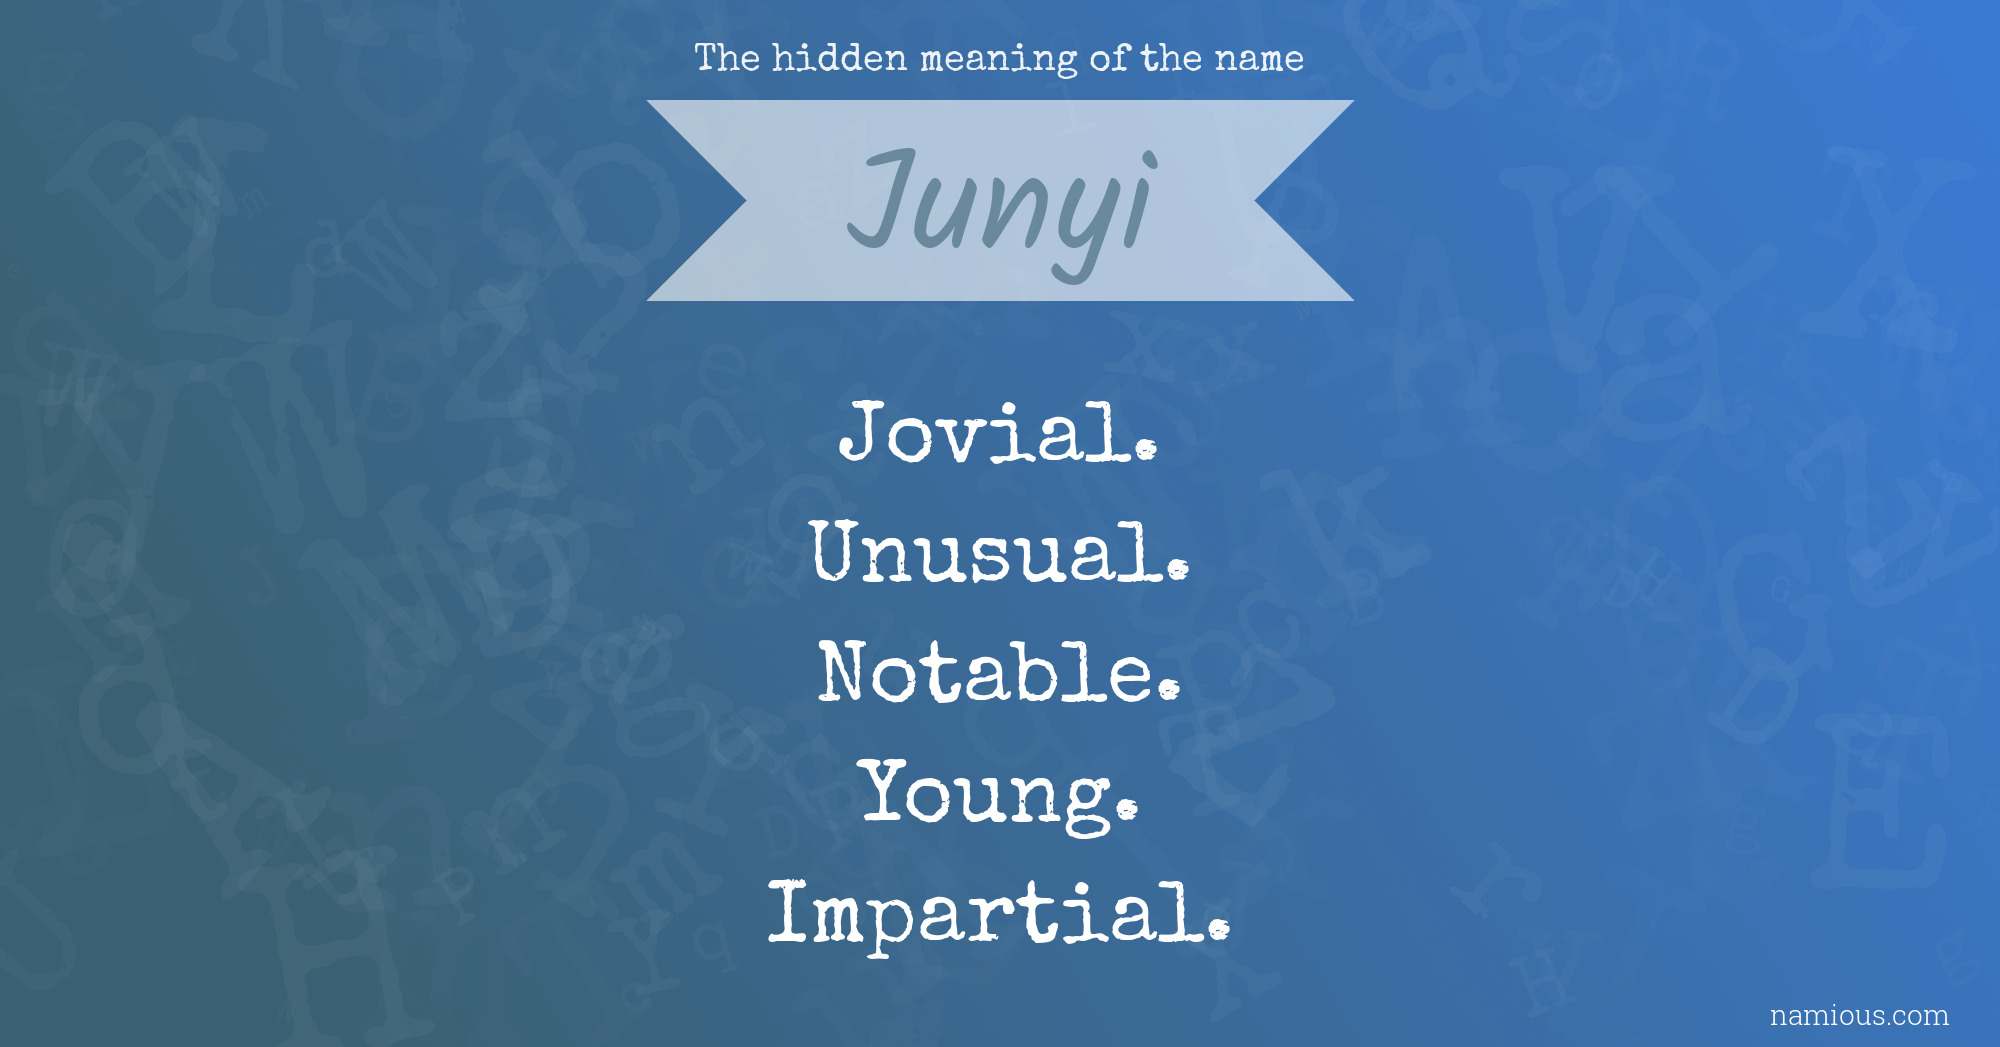 The hidden meaning of the name Junyi